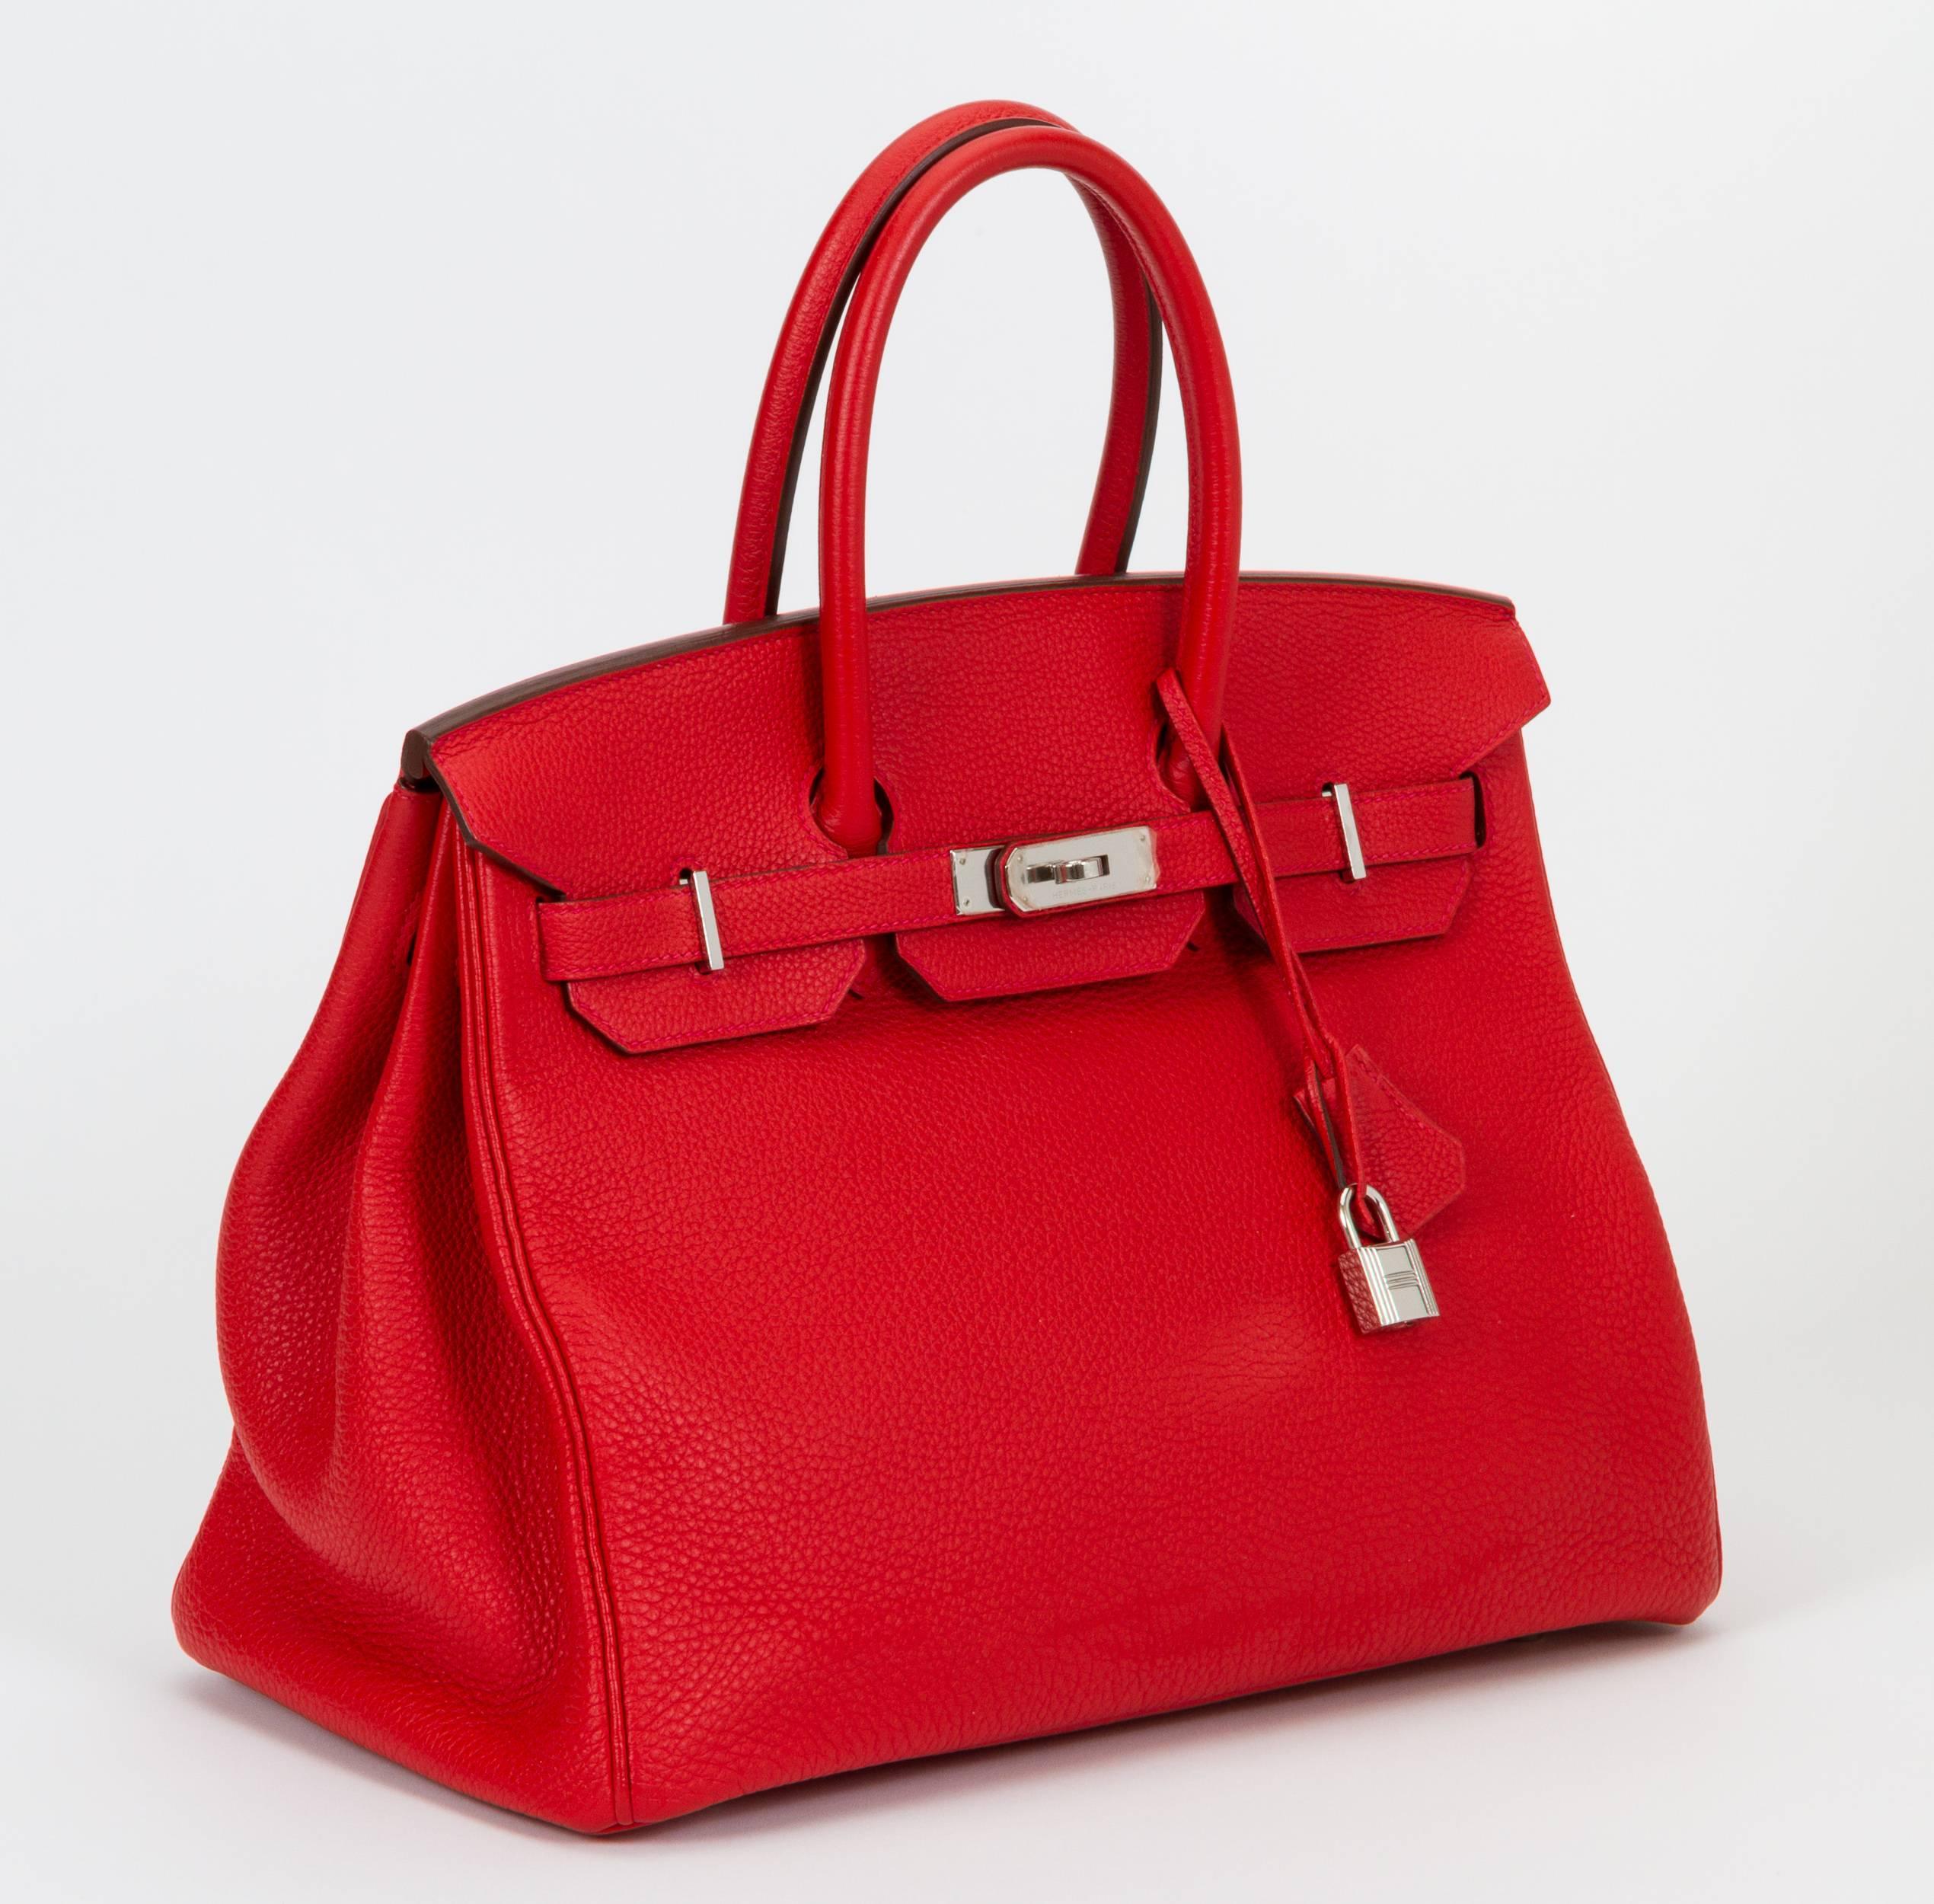 Hermès 35cm Birkin bag in geranium Togo leather with palladium hardware. Plastic on hardware, has been carried a few times. Includes clochette, tirette, lock, keys, rain jacket, and dust bag. Date stamp P in a square for 2012.
